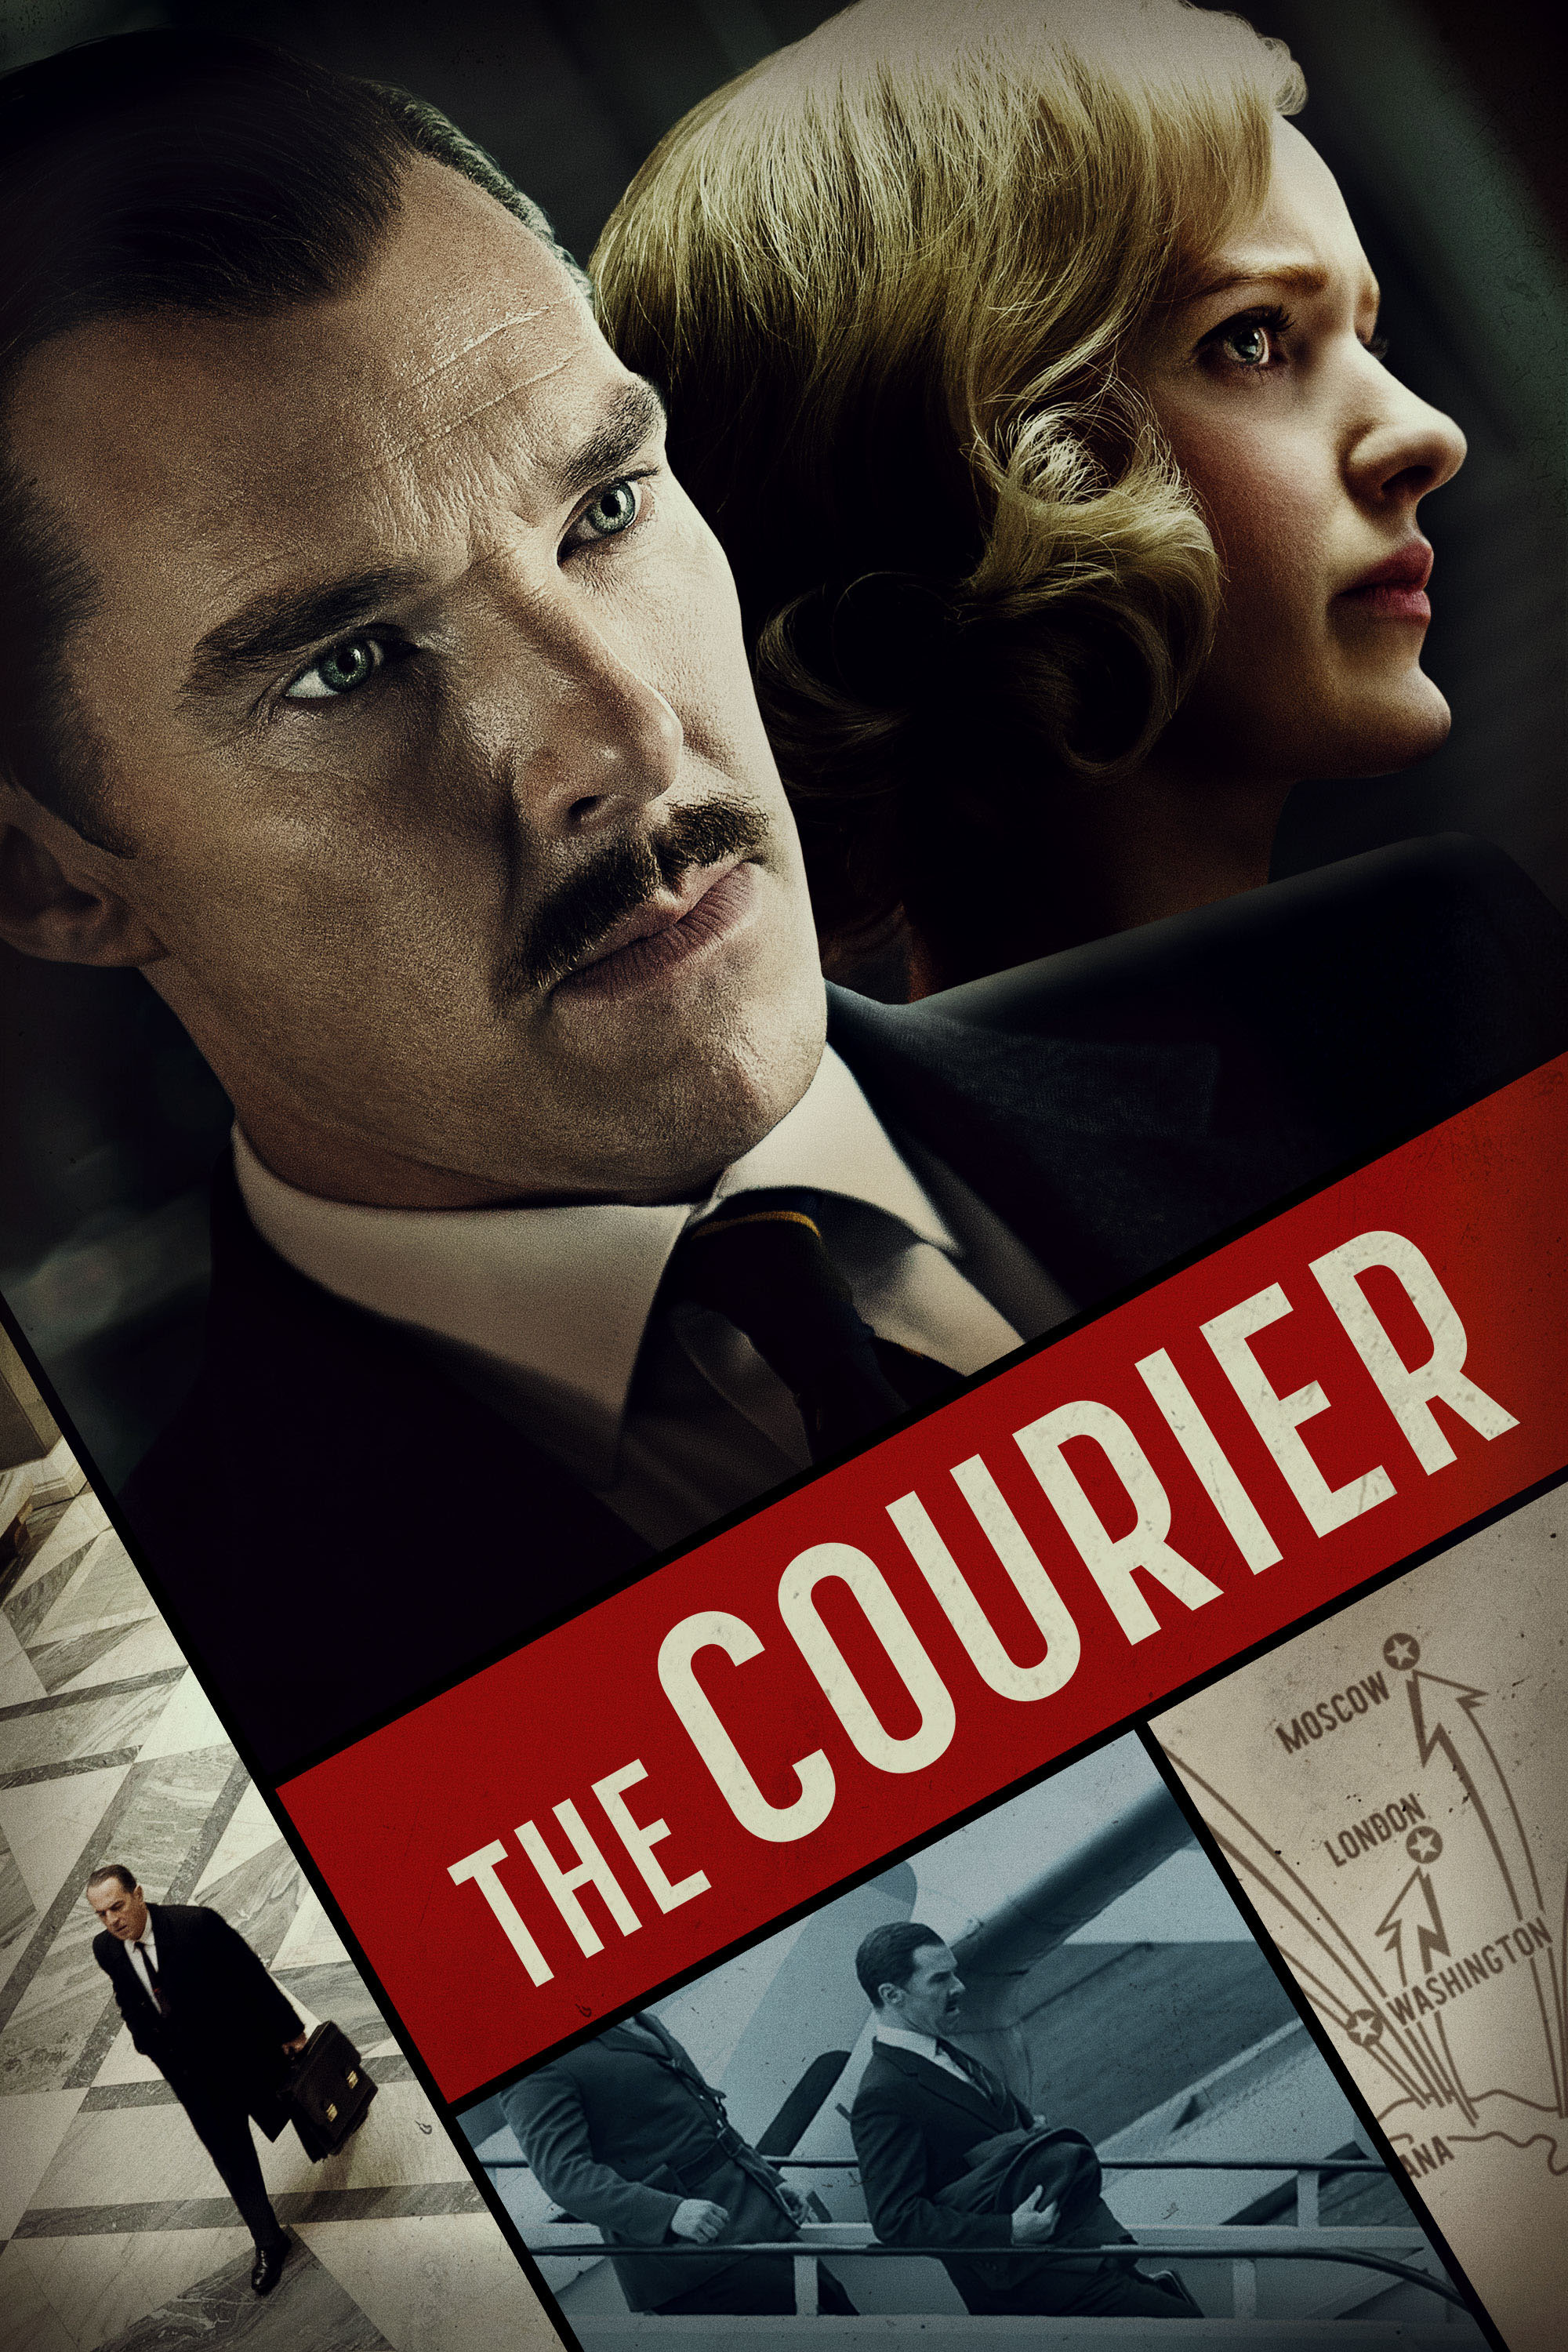 The Courier DVD cover.